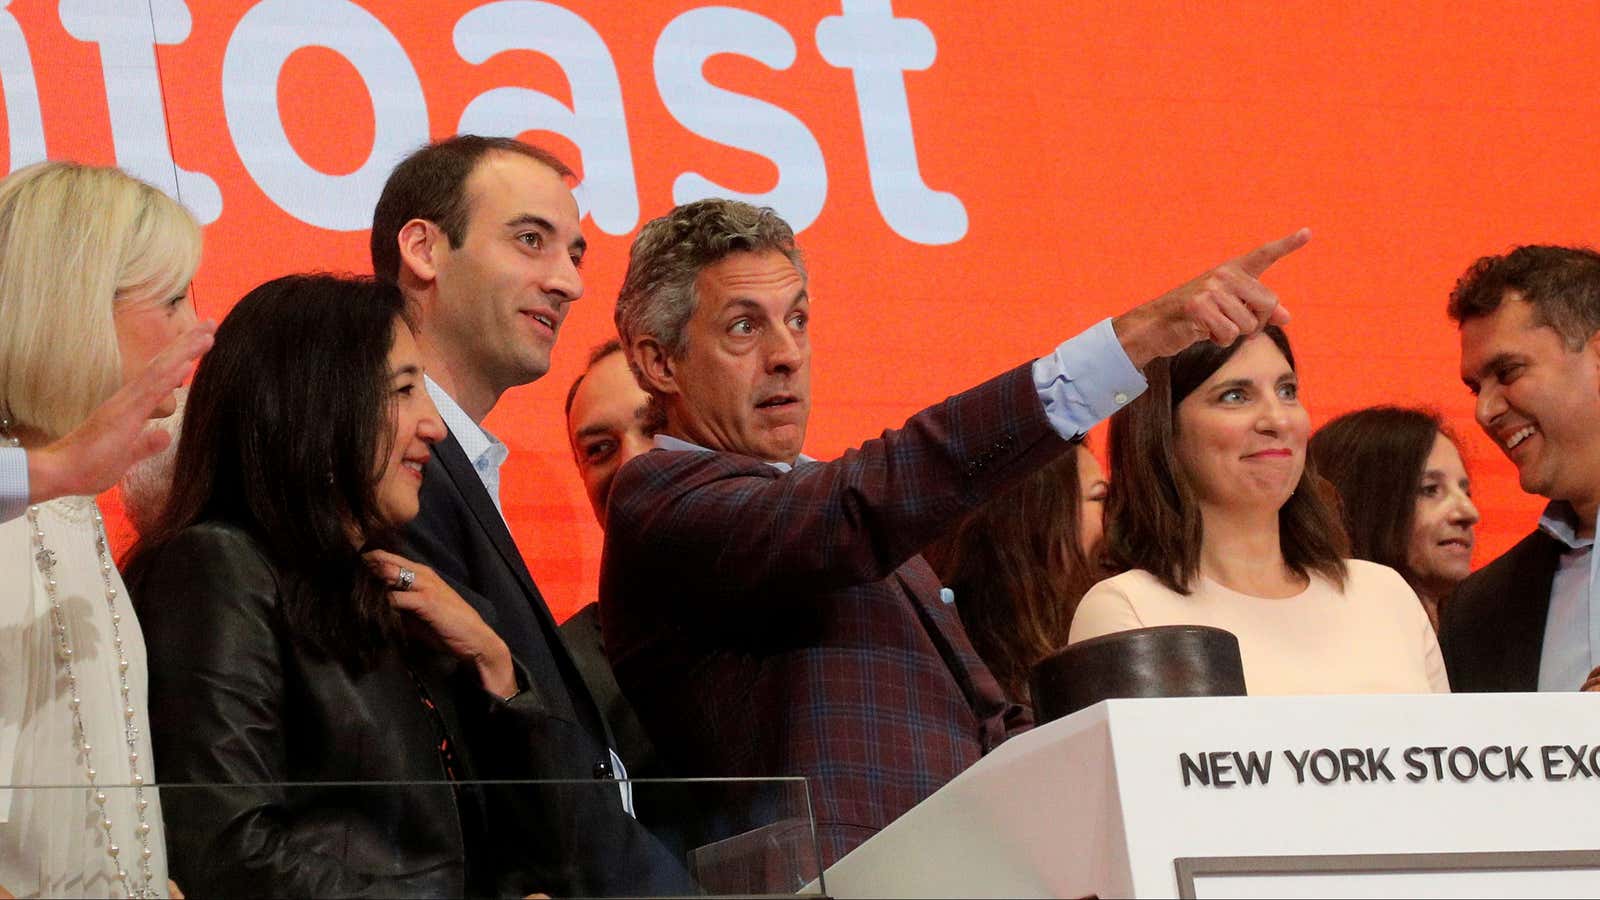 Toast’s CEO Chris Comparato and co-founder Steve Fredette attend the company’s IPO at the New York Stock Exchange.